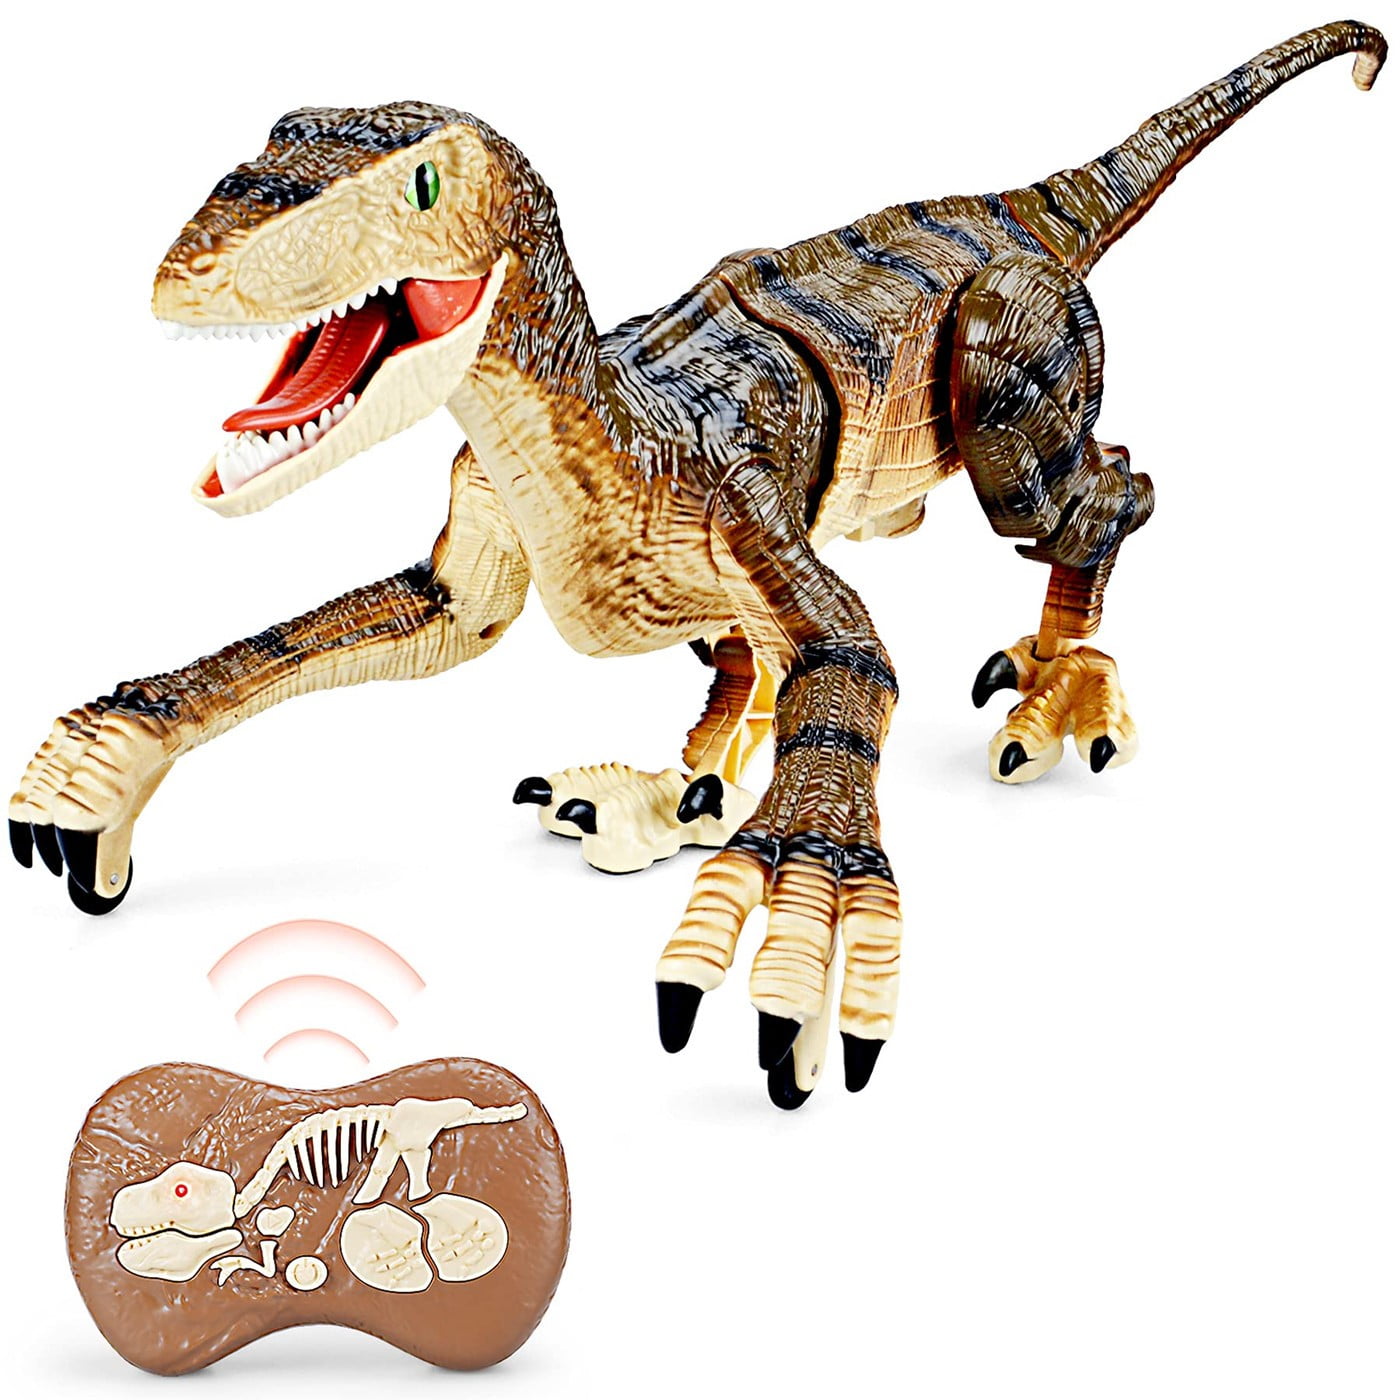 Years Old Gifts Brown Roaring Sounds,LED Lights,2.4Ghz,RC Electronic Dinosaur Velociraptor Toys for Kids 3 4 5 6 7 8 9 10 Remote Control Dinosaur Toys,Simulation Robotic Dinosaurs,with USB Charge 